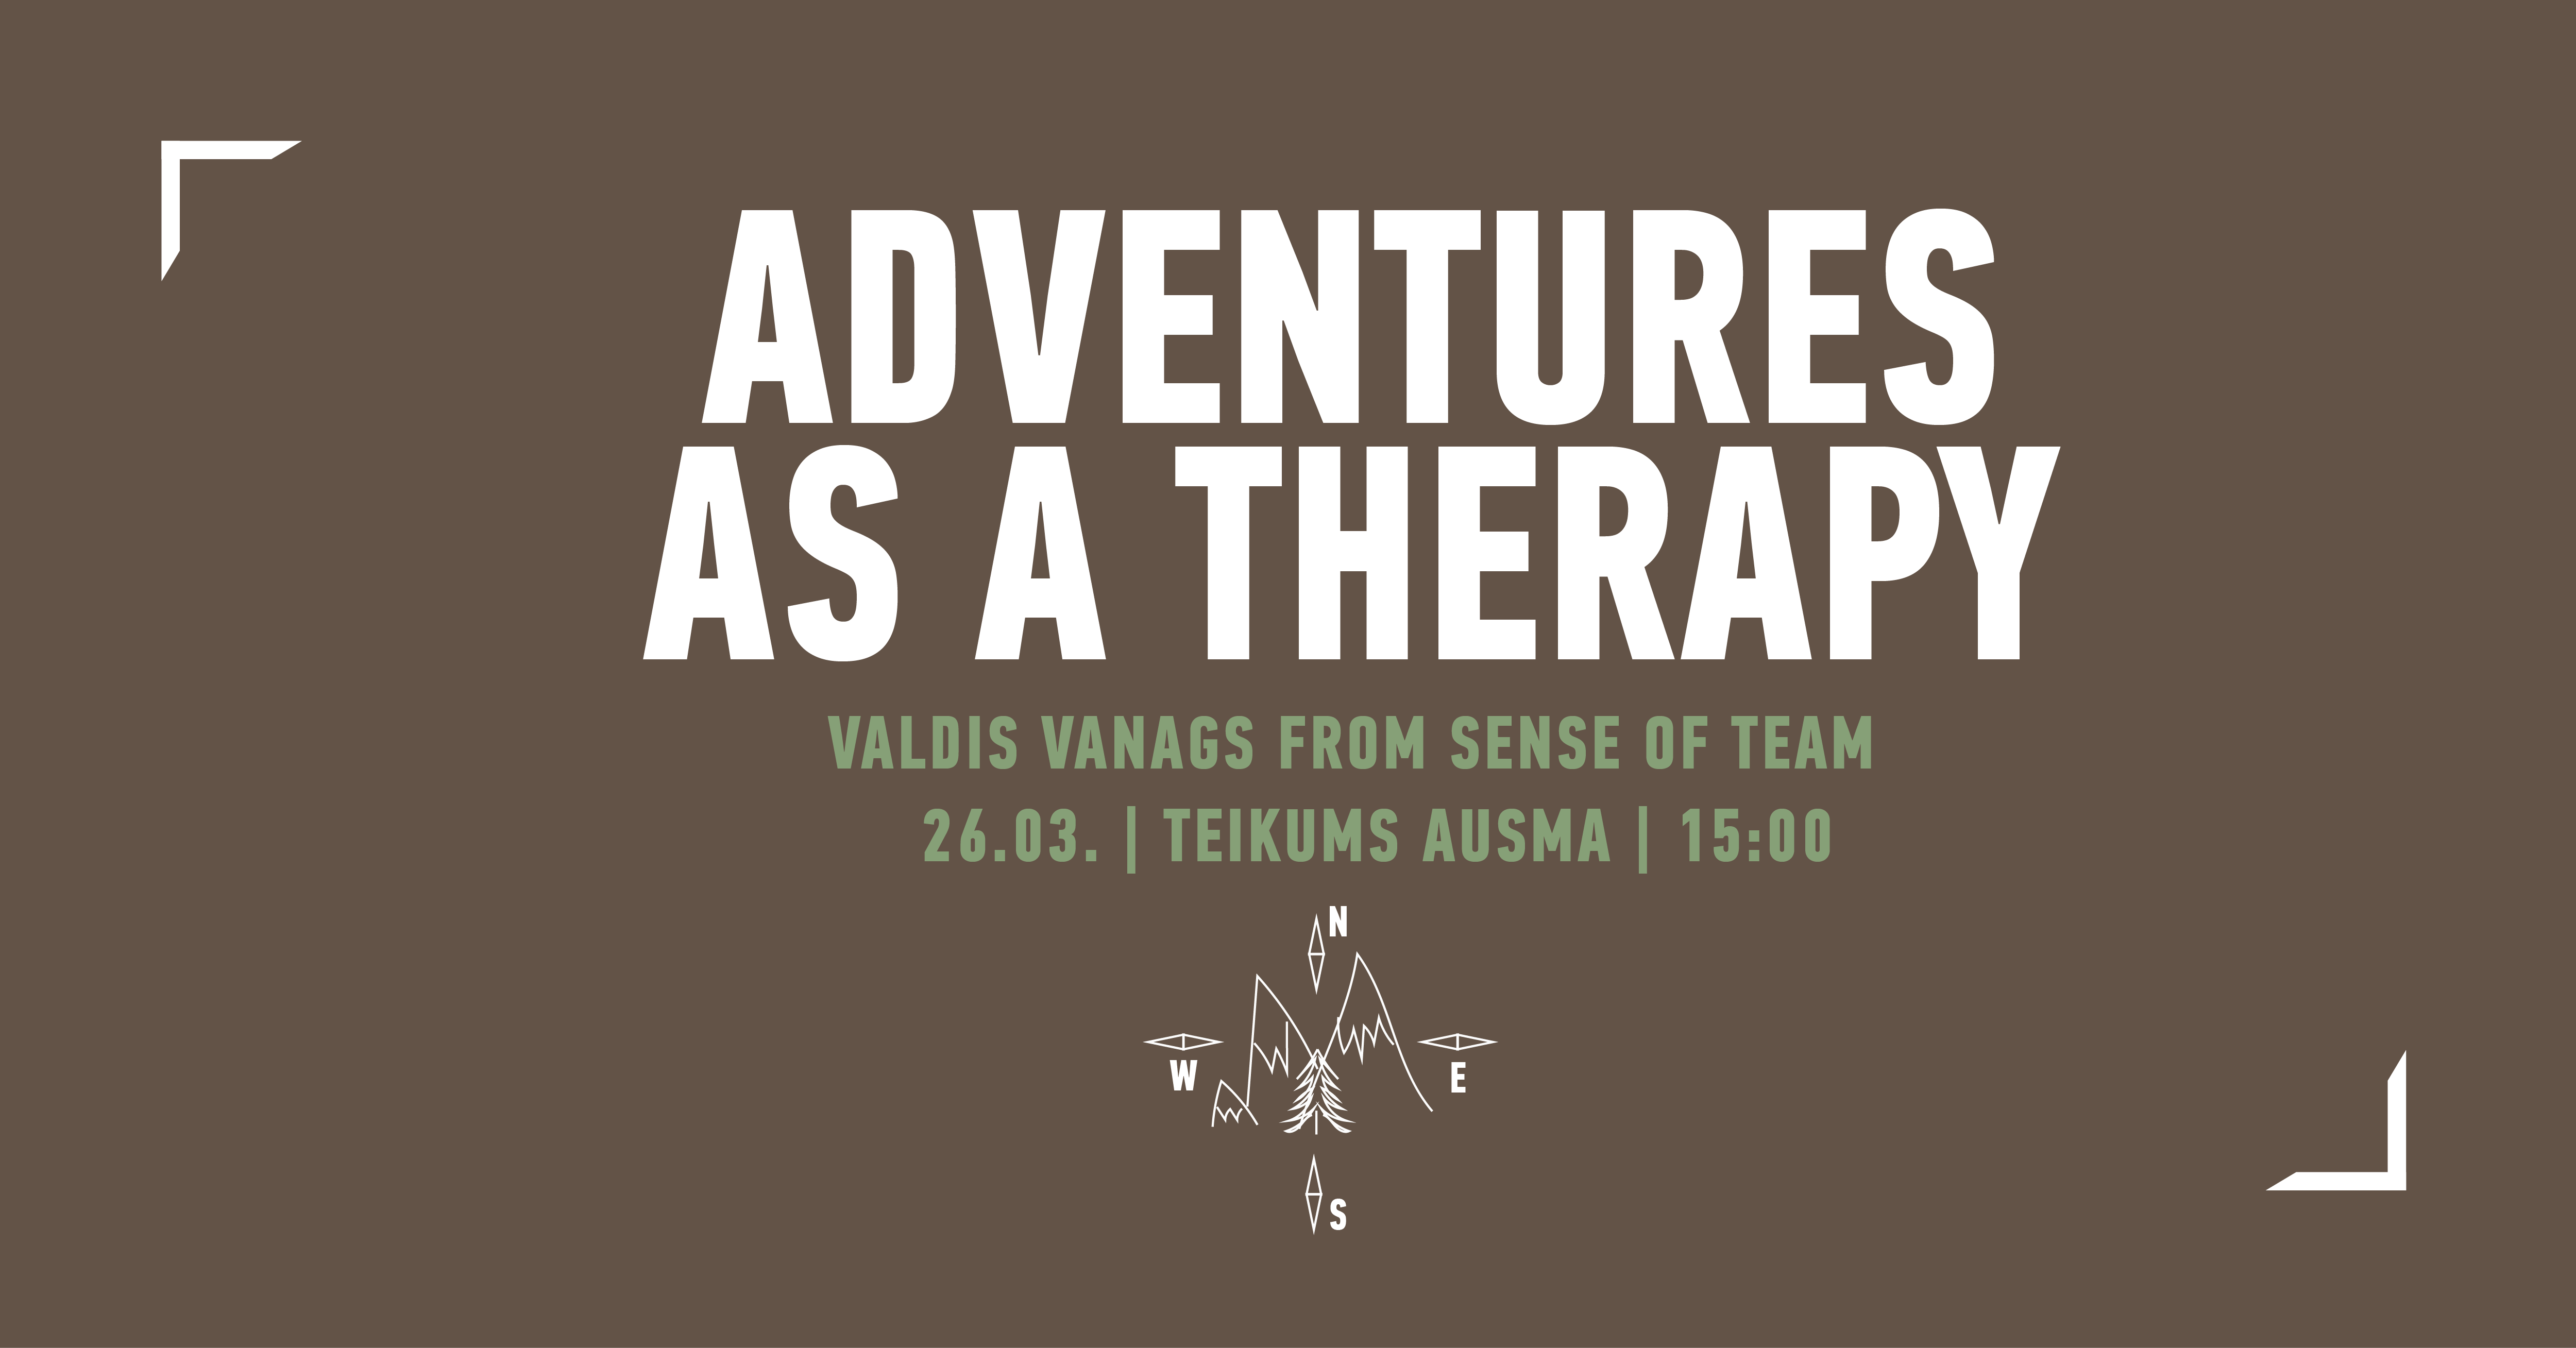 Adventures as a Therapy // Valdis Vanags